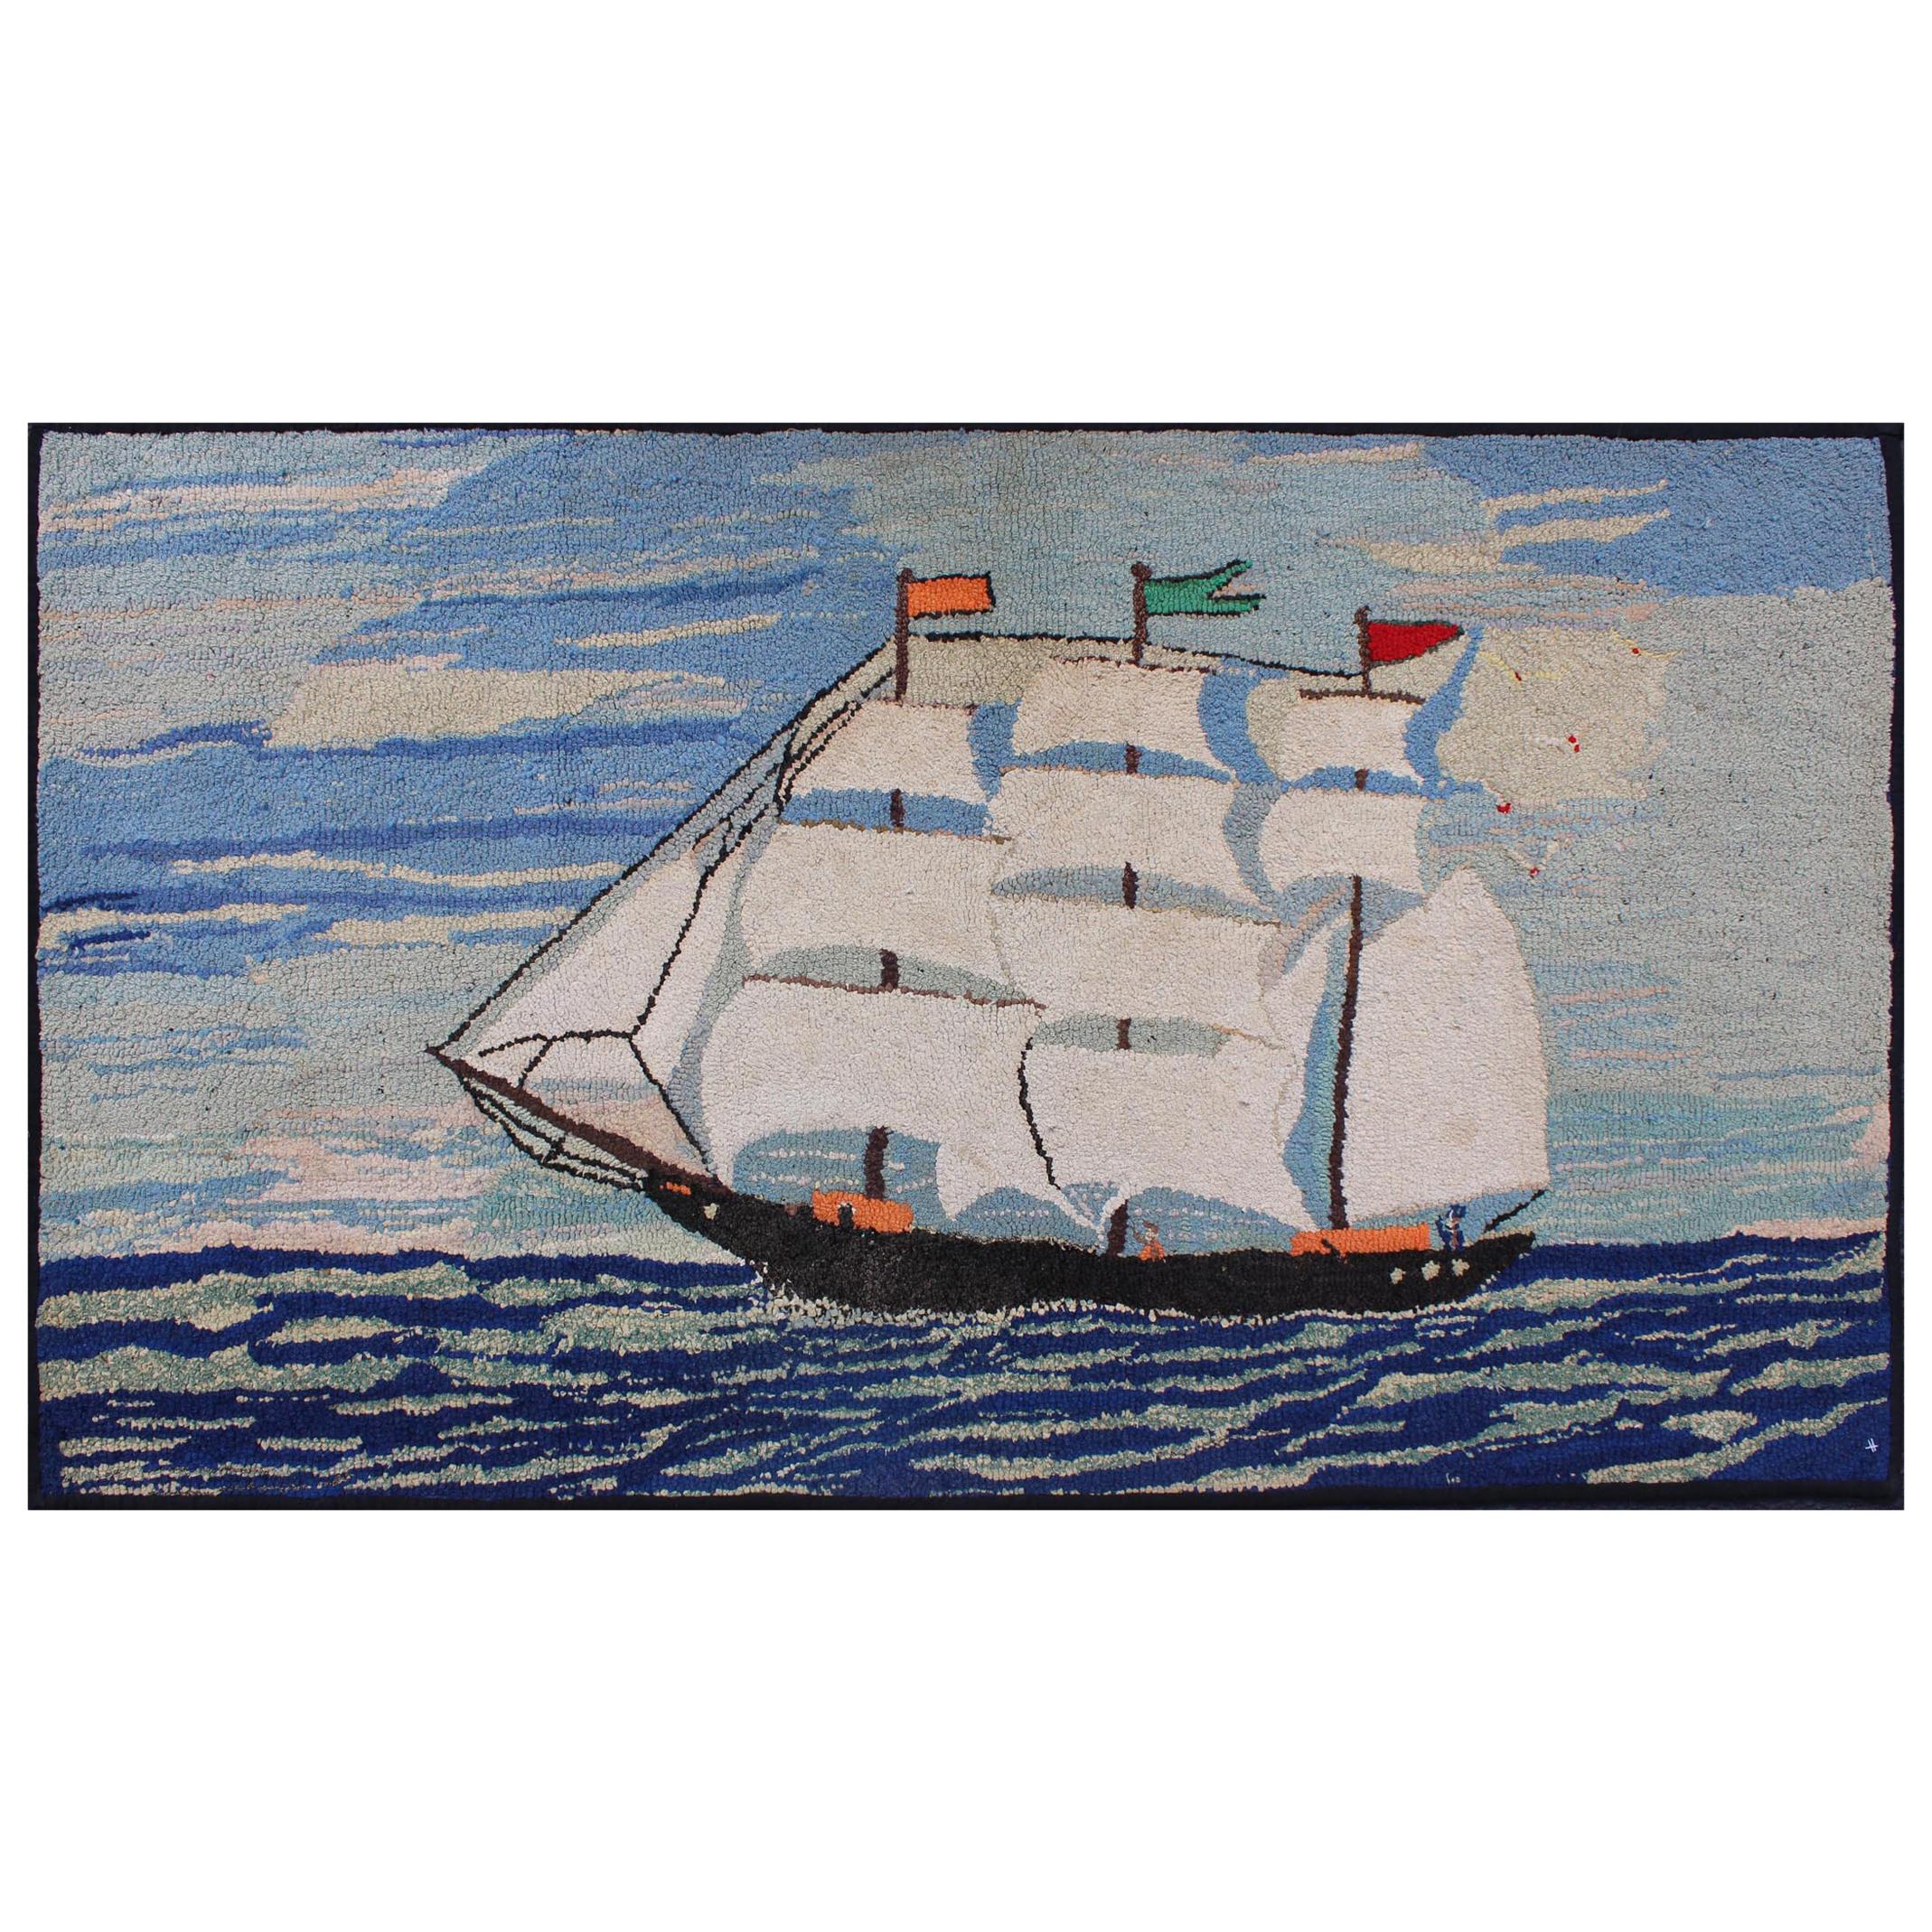 Pictorial Antique American Hooked Rug with Ship at Sea Design